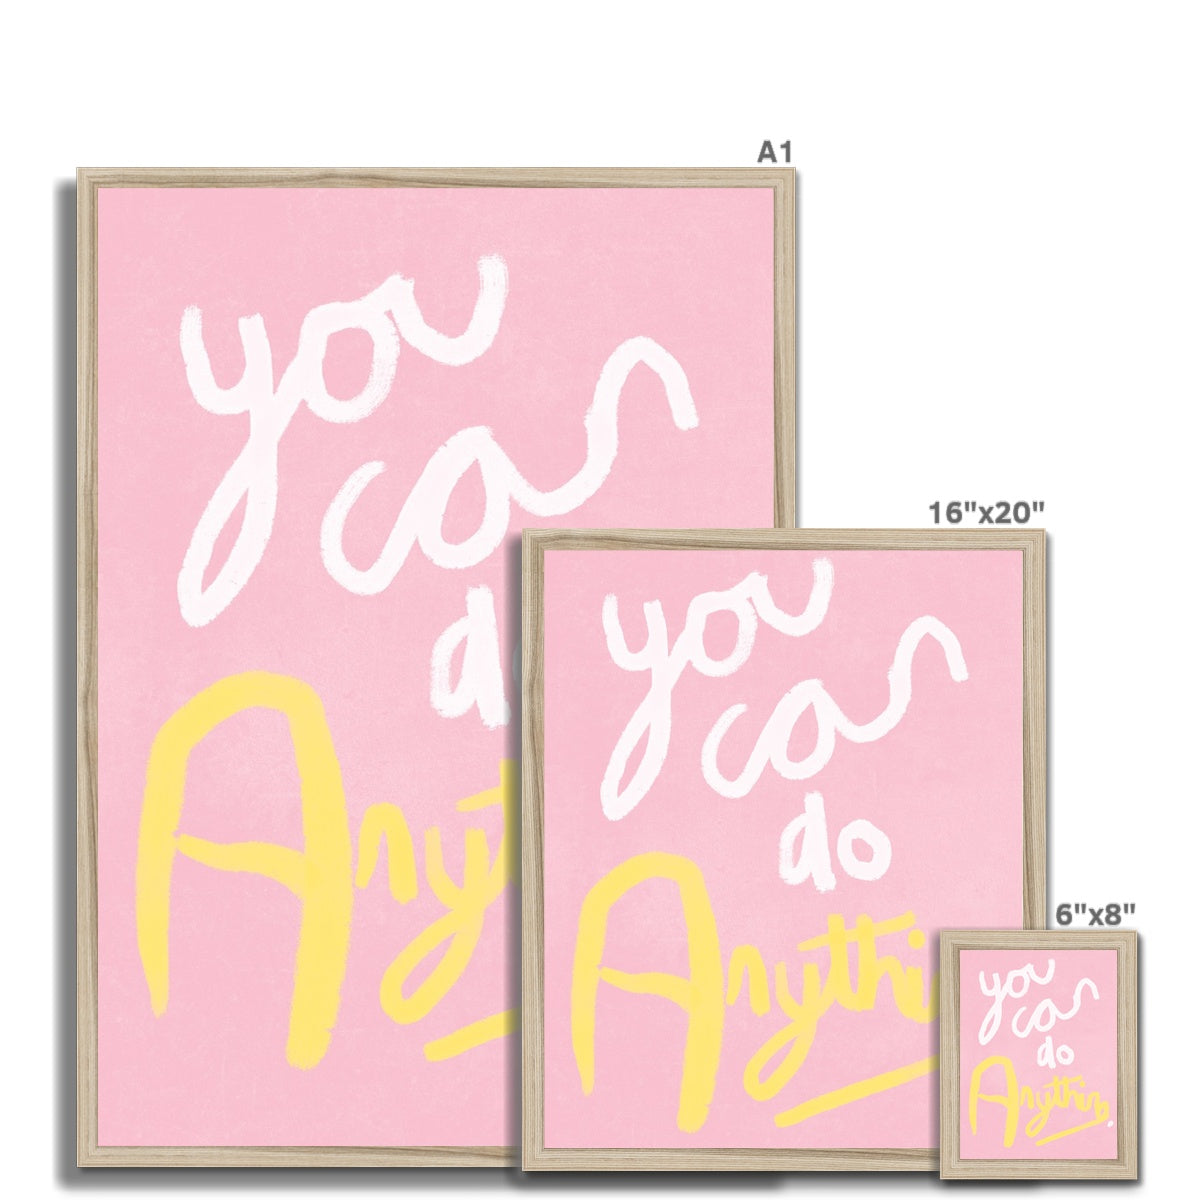 You Can Do Anything Print - Pink, White, Yellow Framed Print